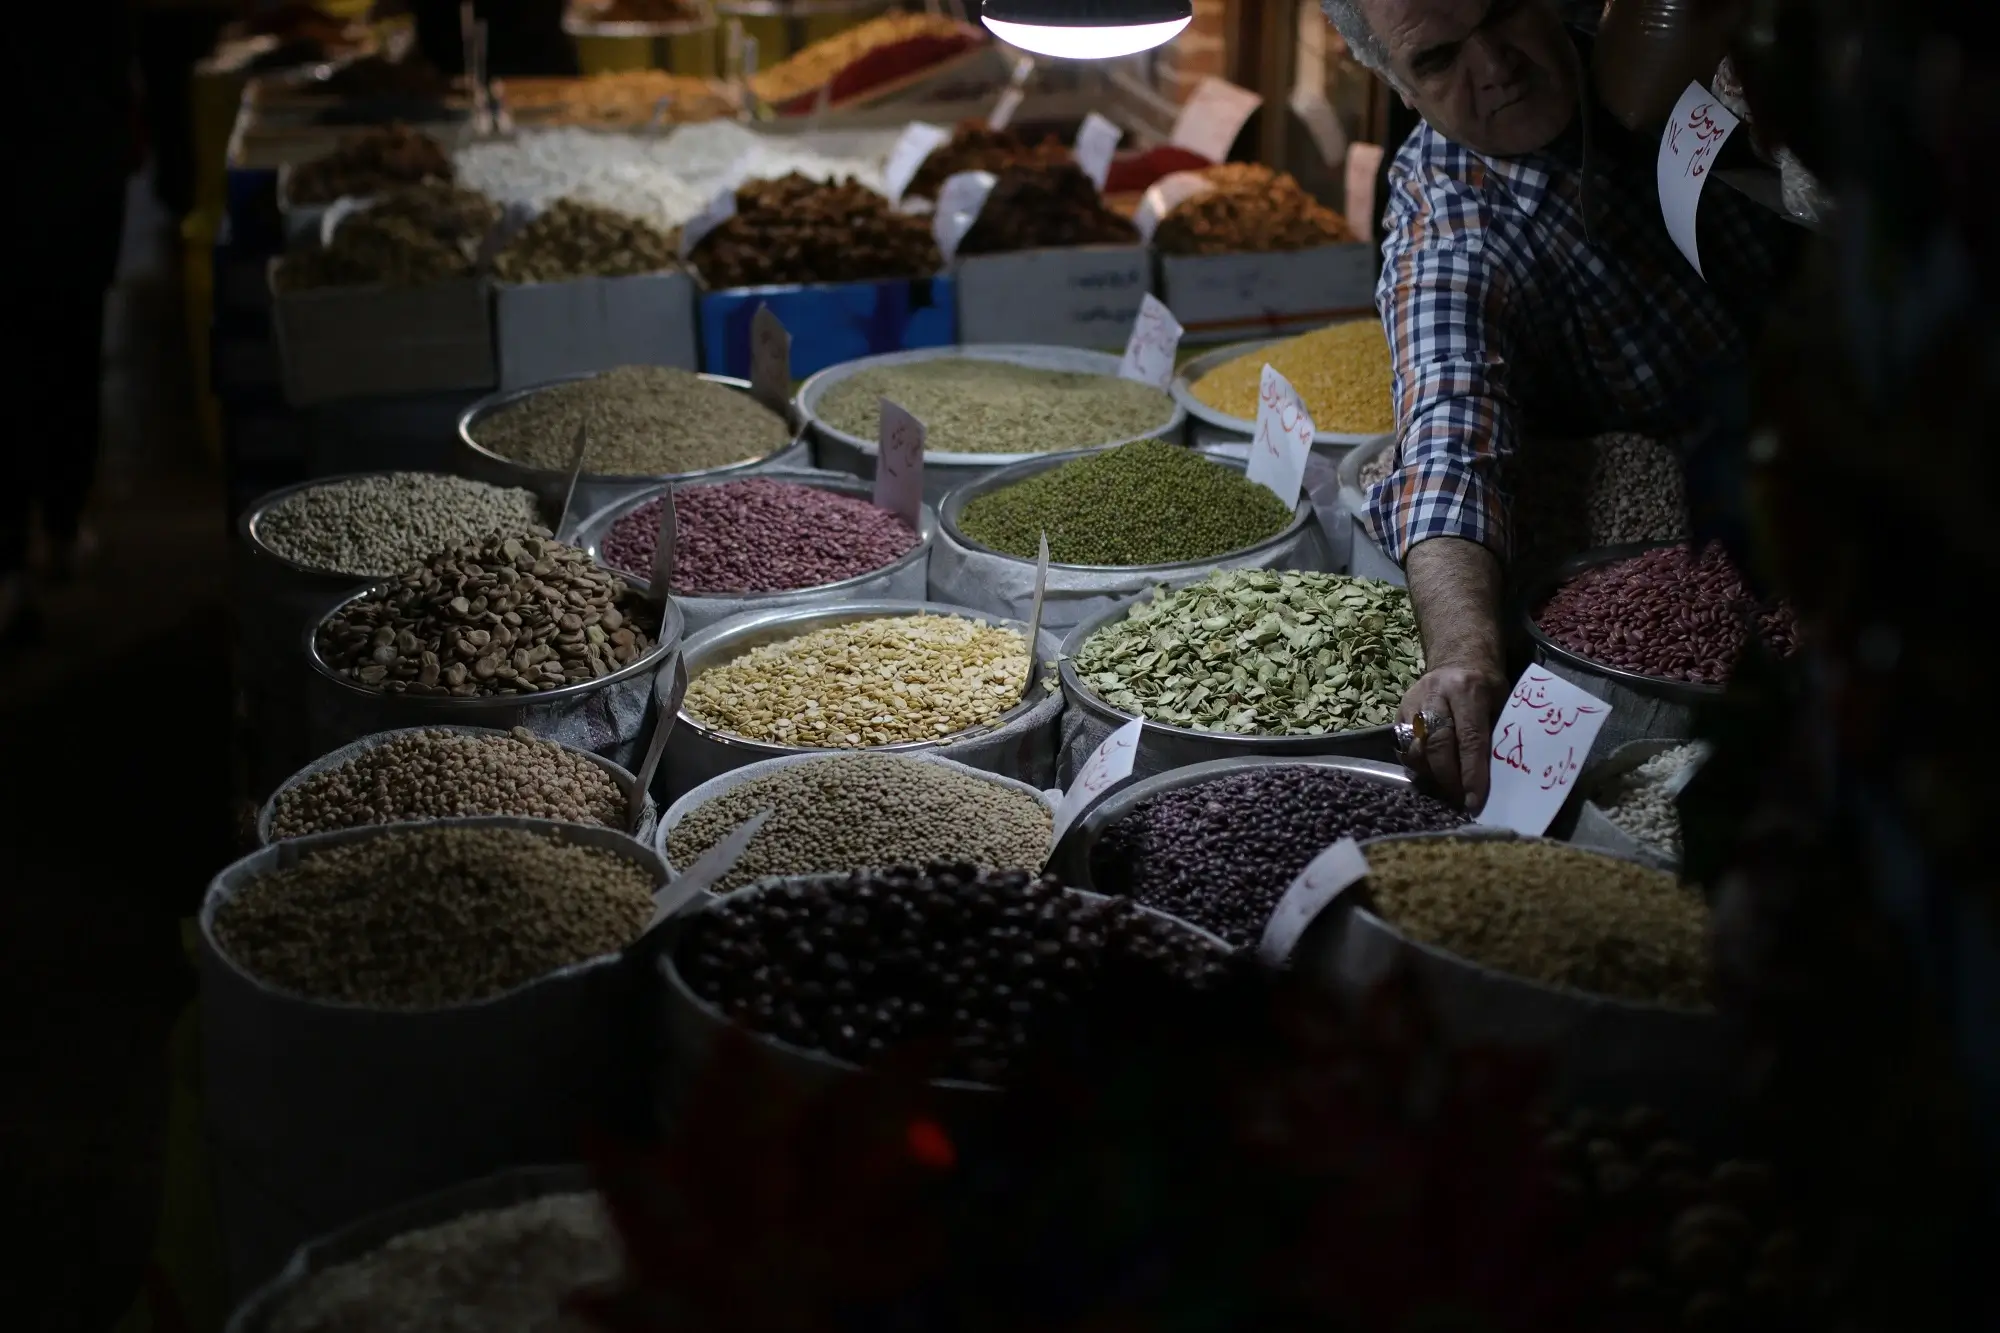 A marekt stall selling different kinds of seeds, representing the concept of GST input tax credits.